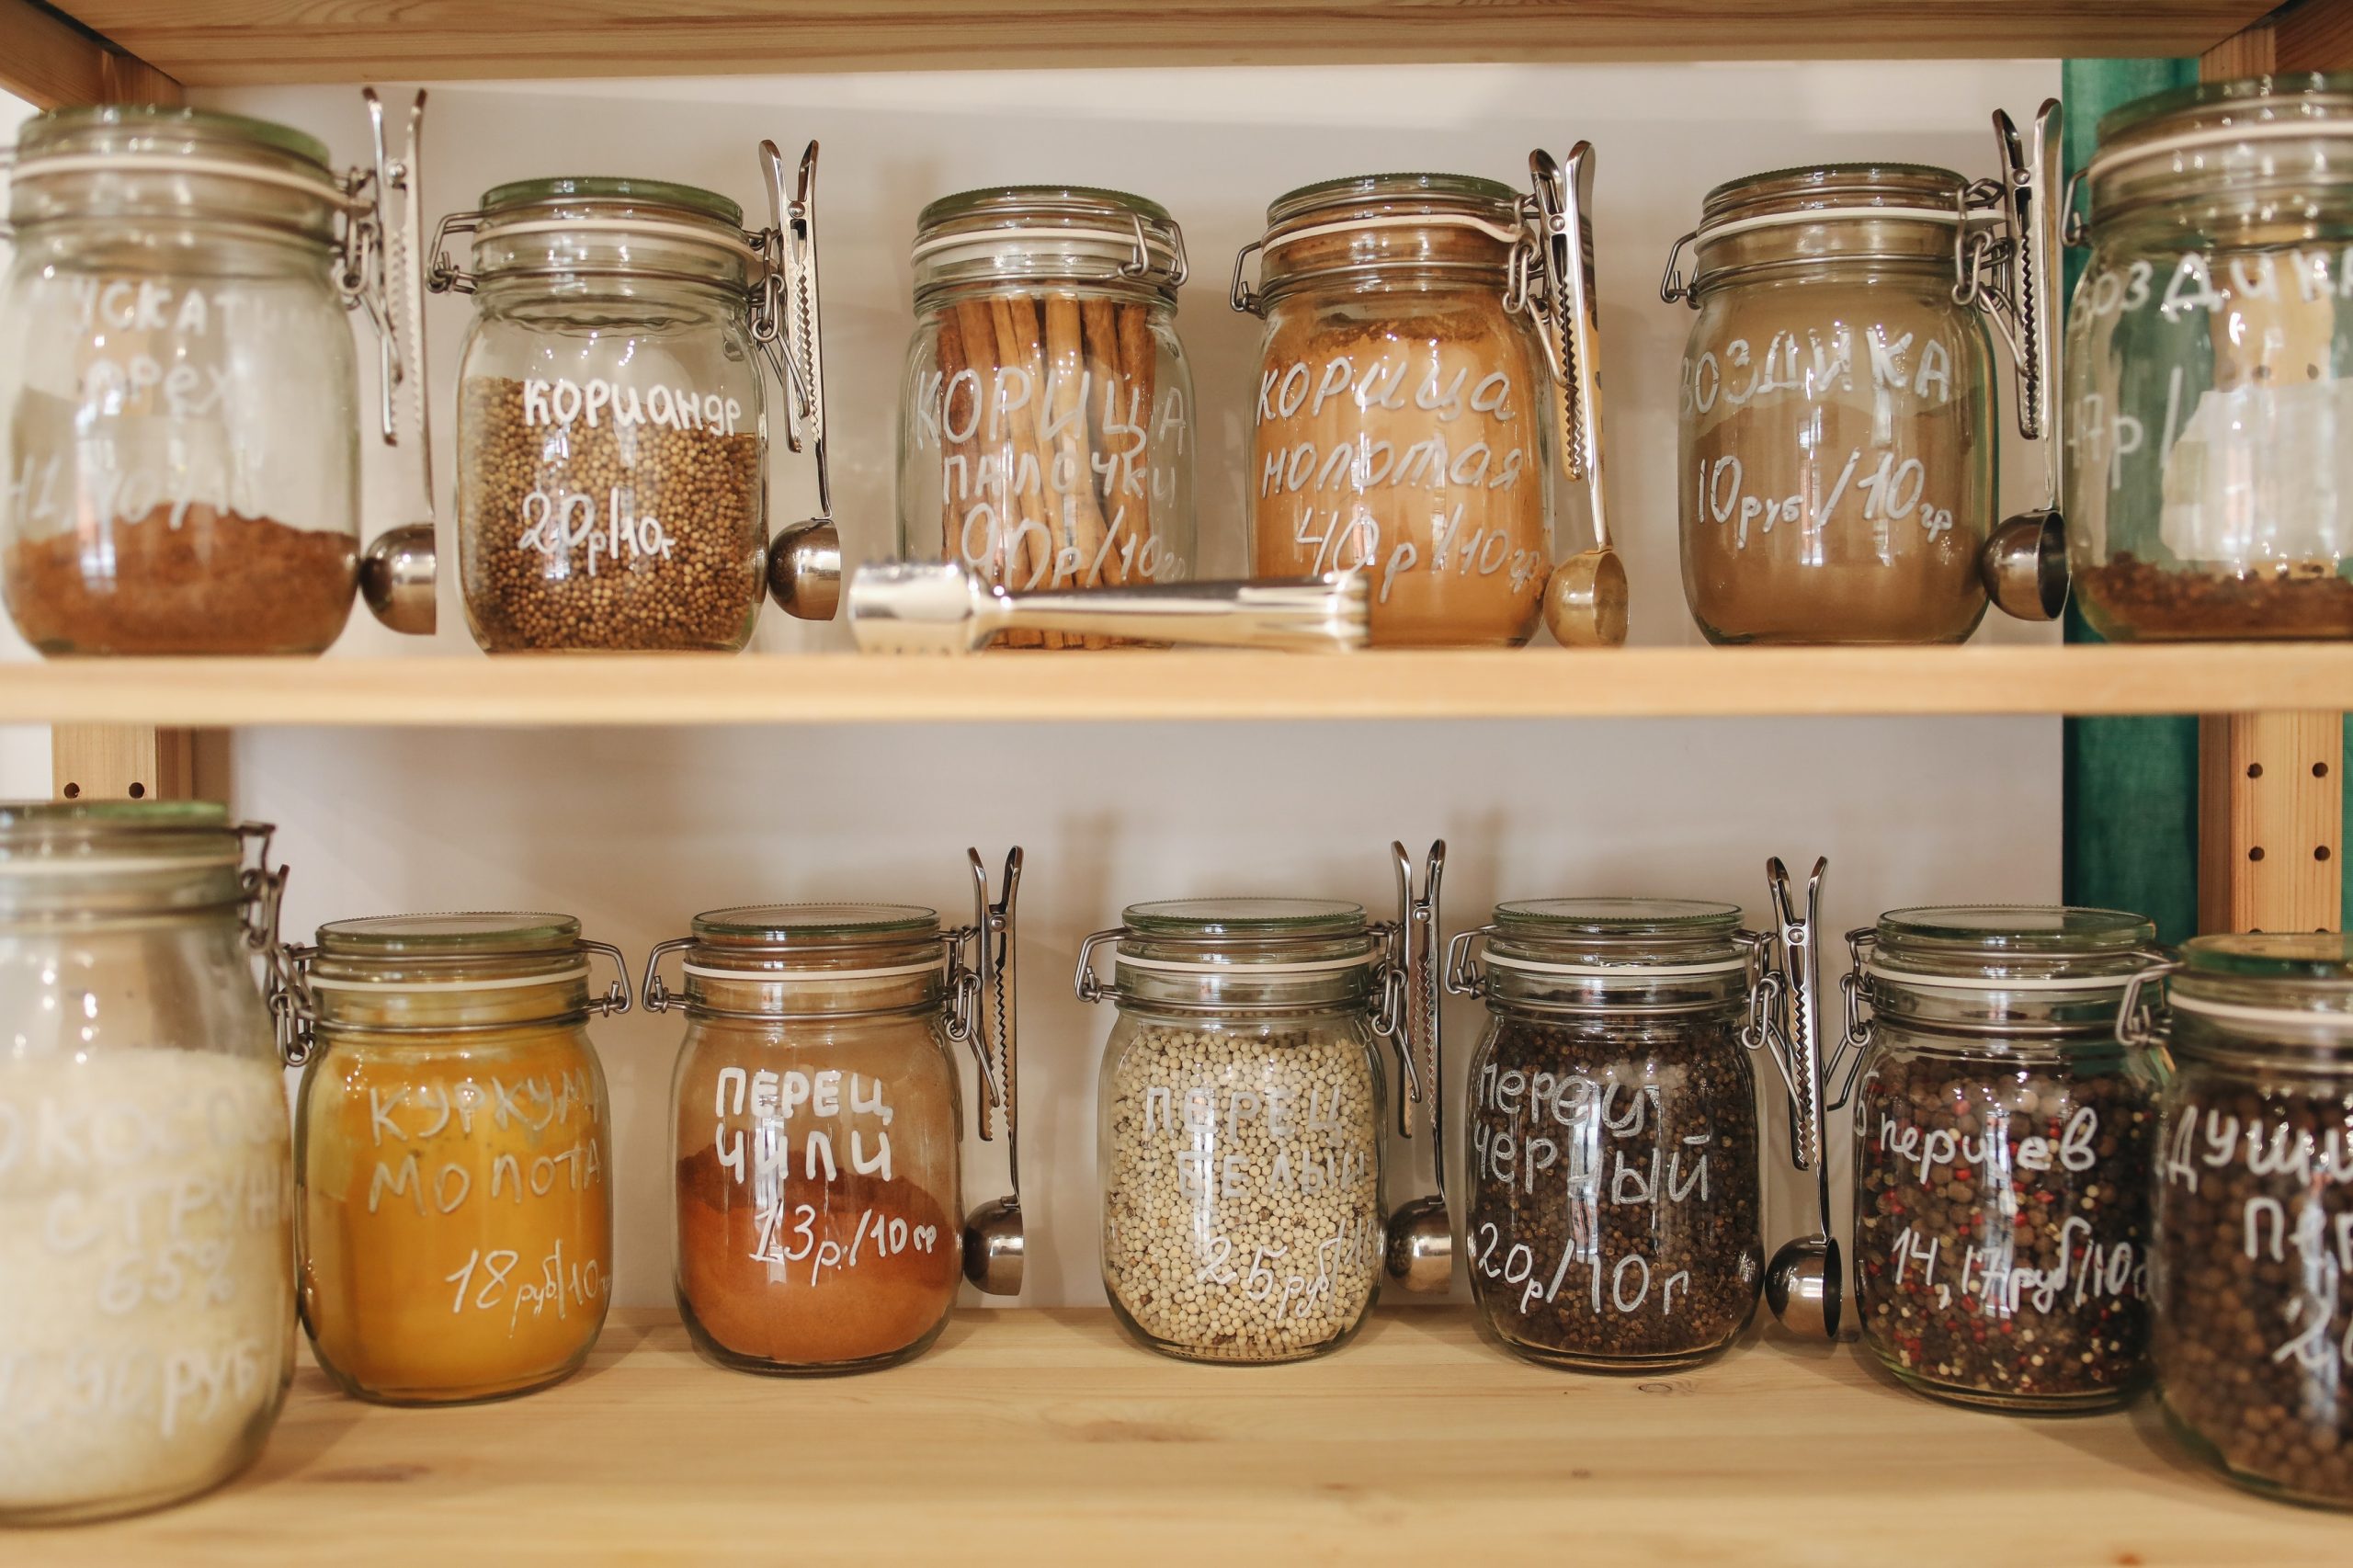 Top 3 Benefits of Keeping Your Pantry Organized